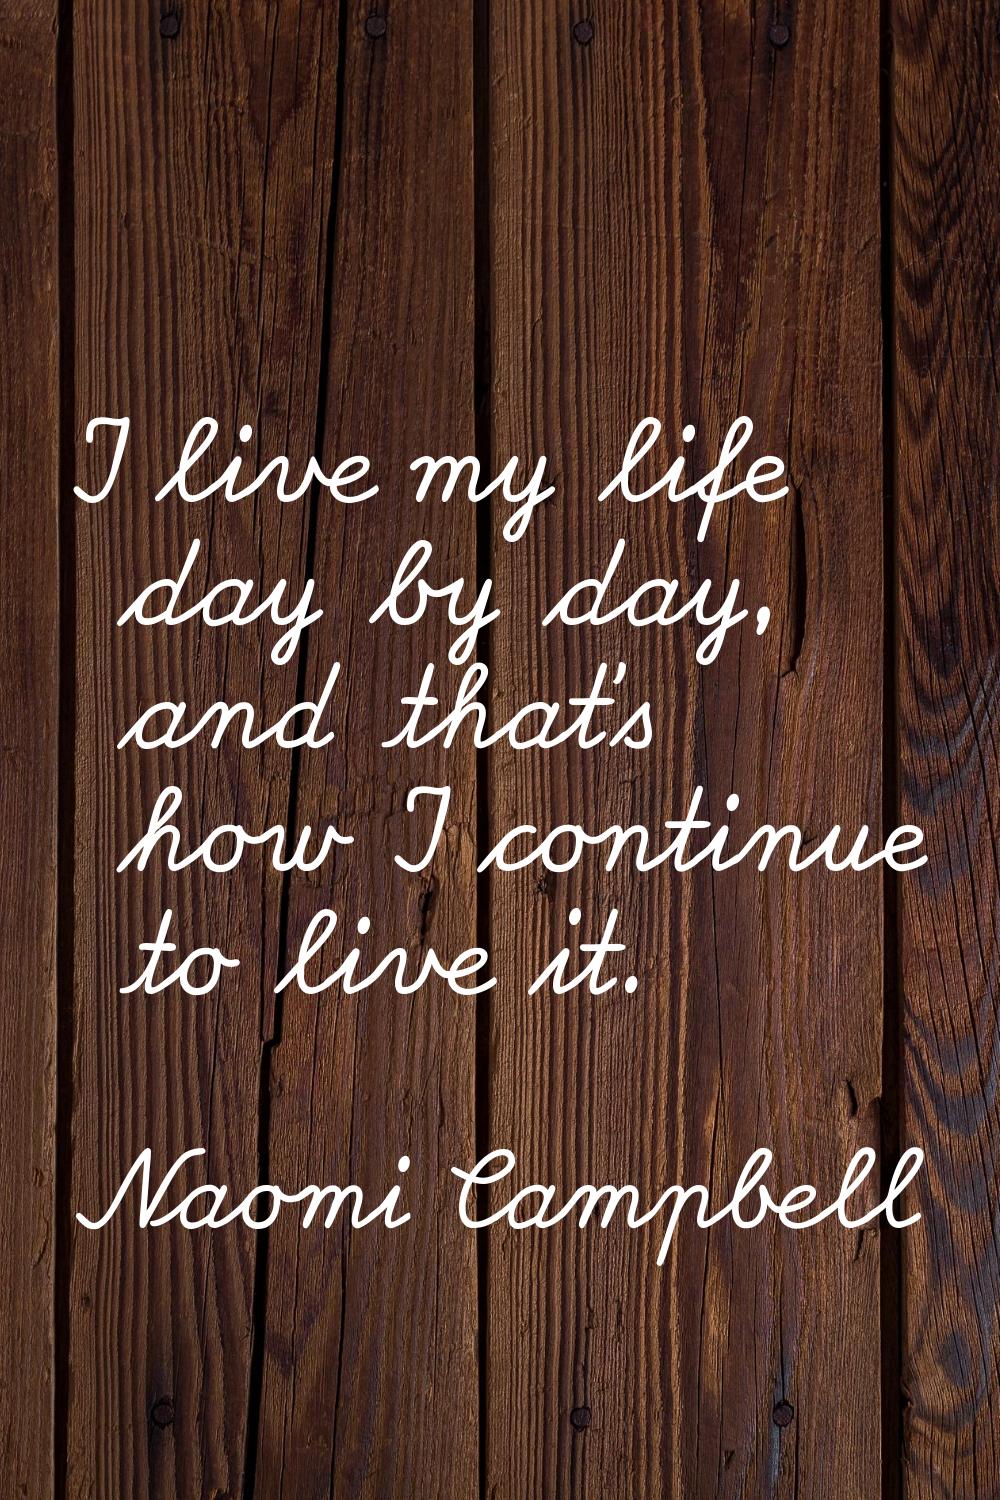 I live my life day by day, and that's how I continue to live it.